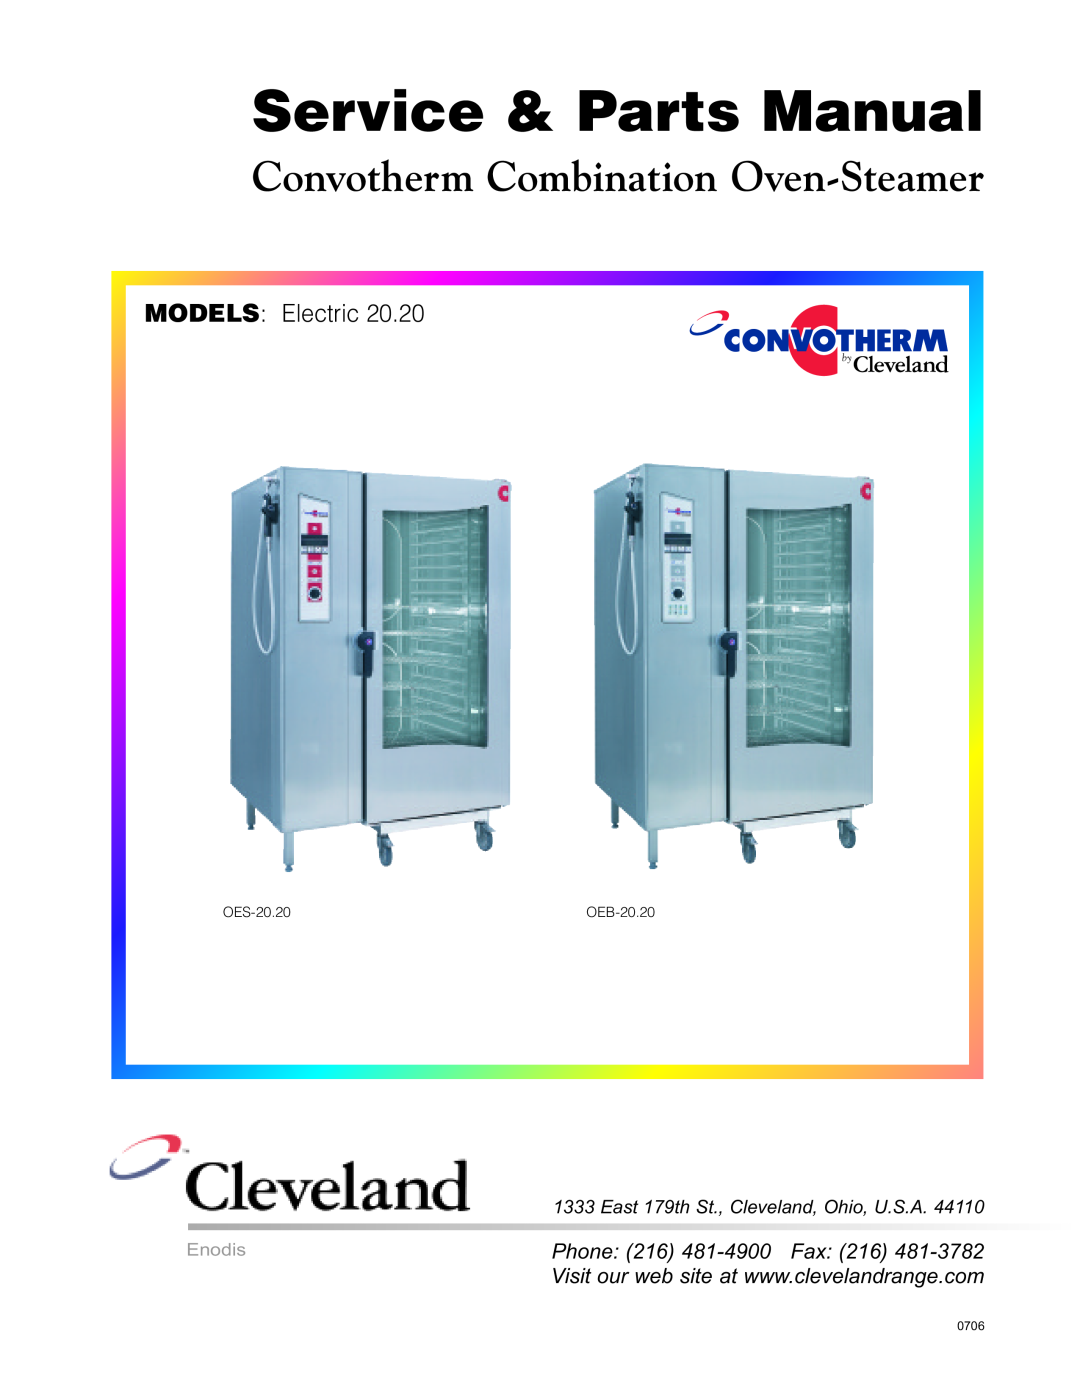 Cleveland Range OES-20.20 specifications Cleveland, Combi Oven-Steamer, ELECTRIC HEATED - Boilerless, System +3, Model 